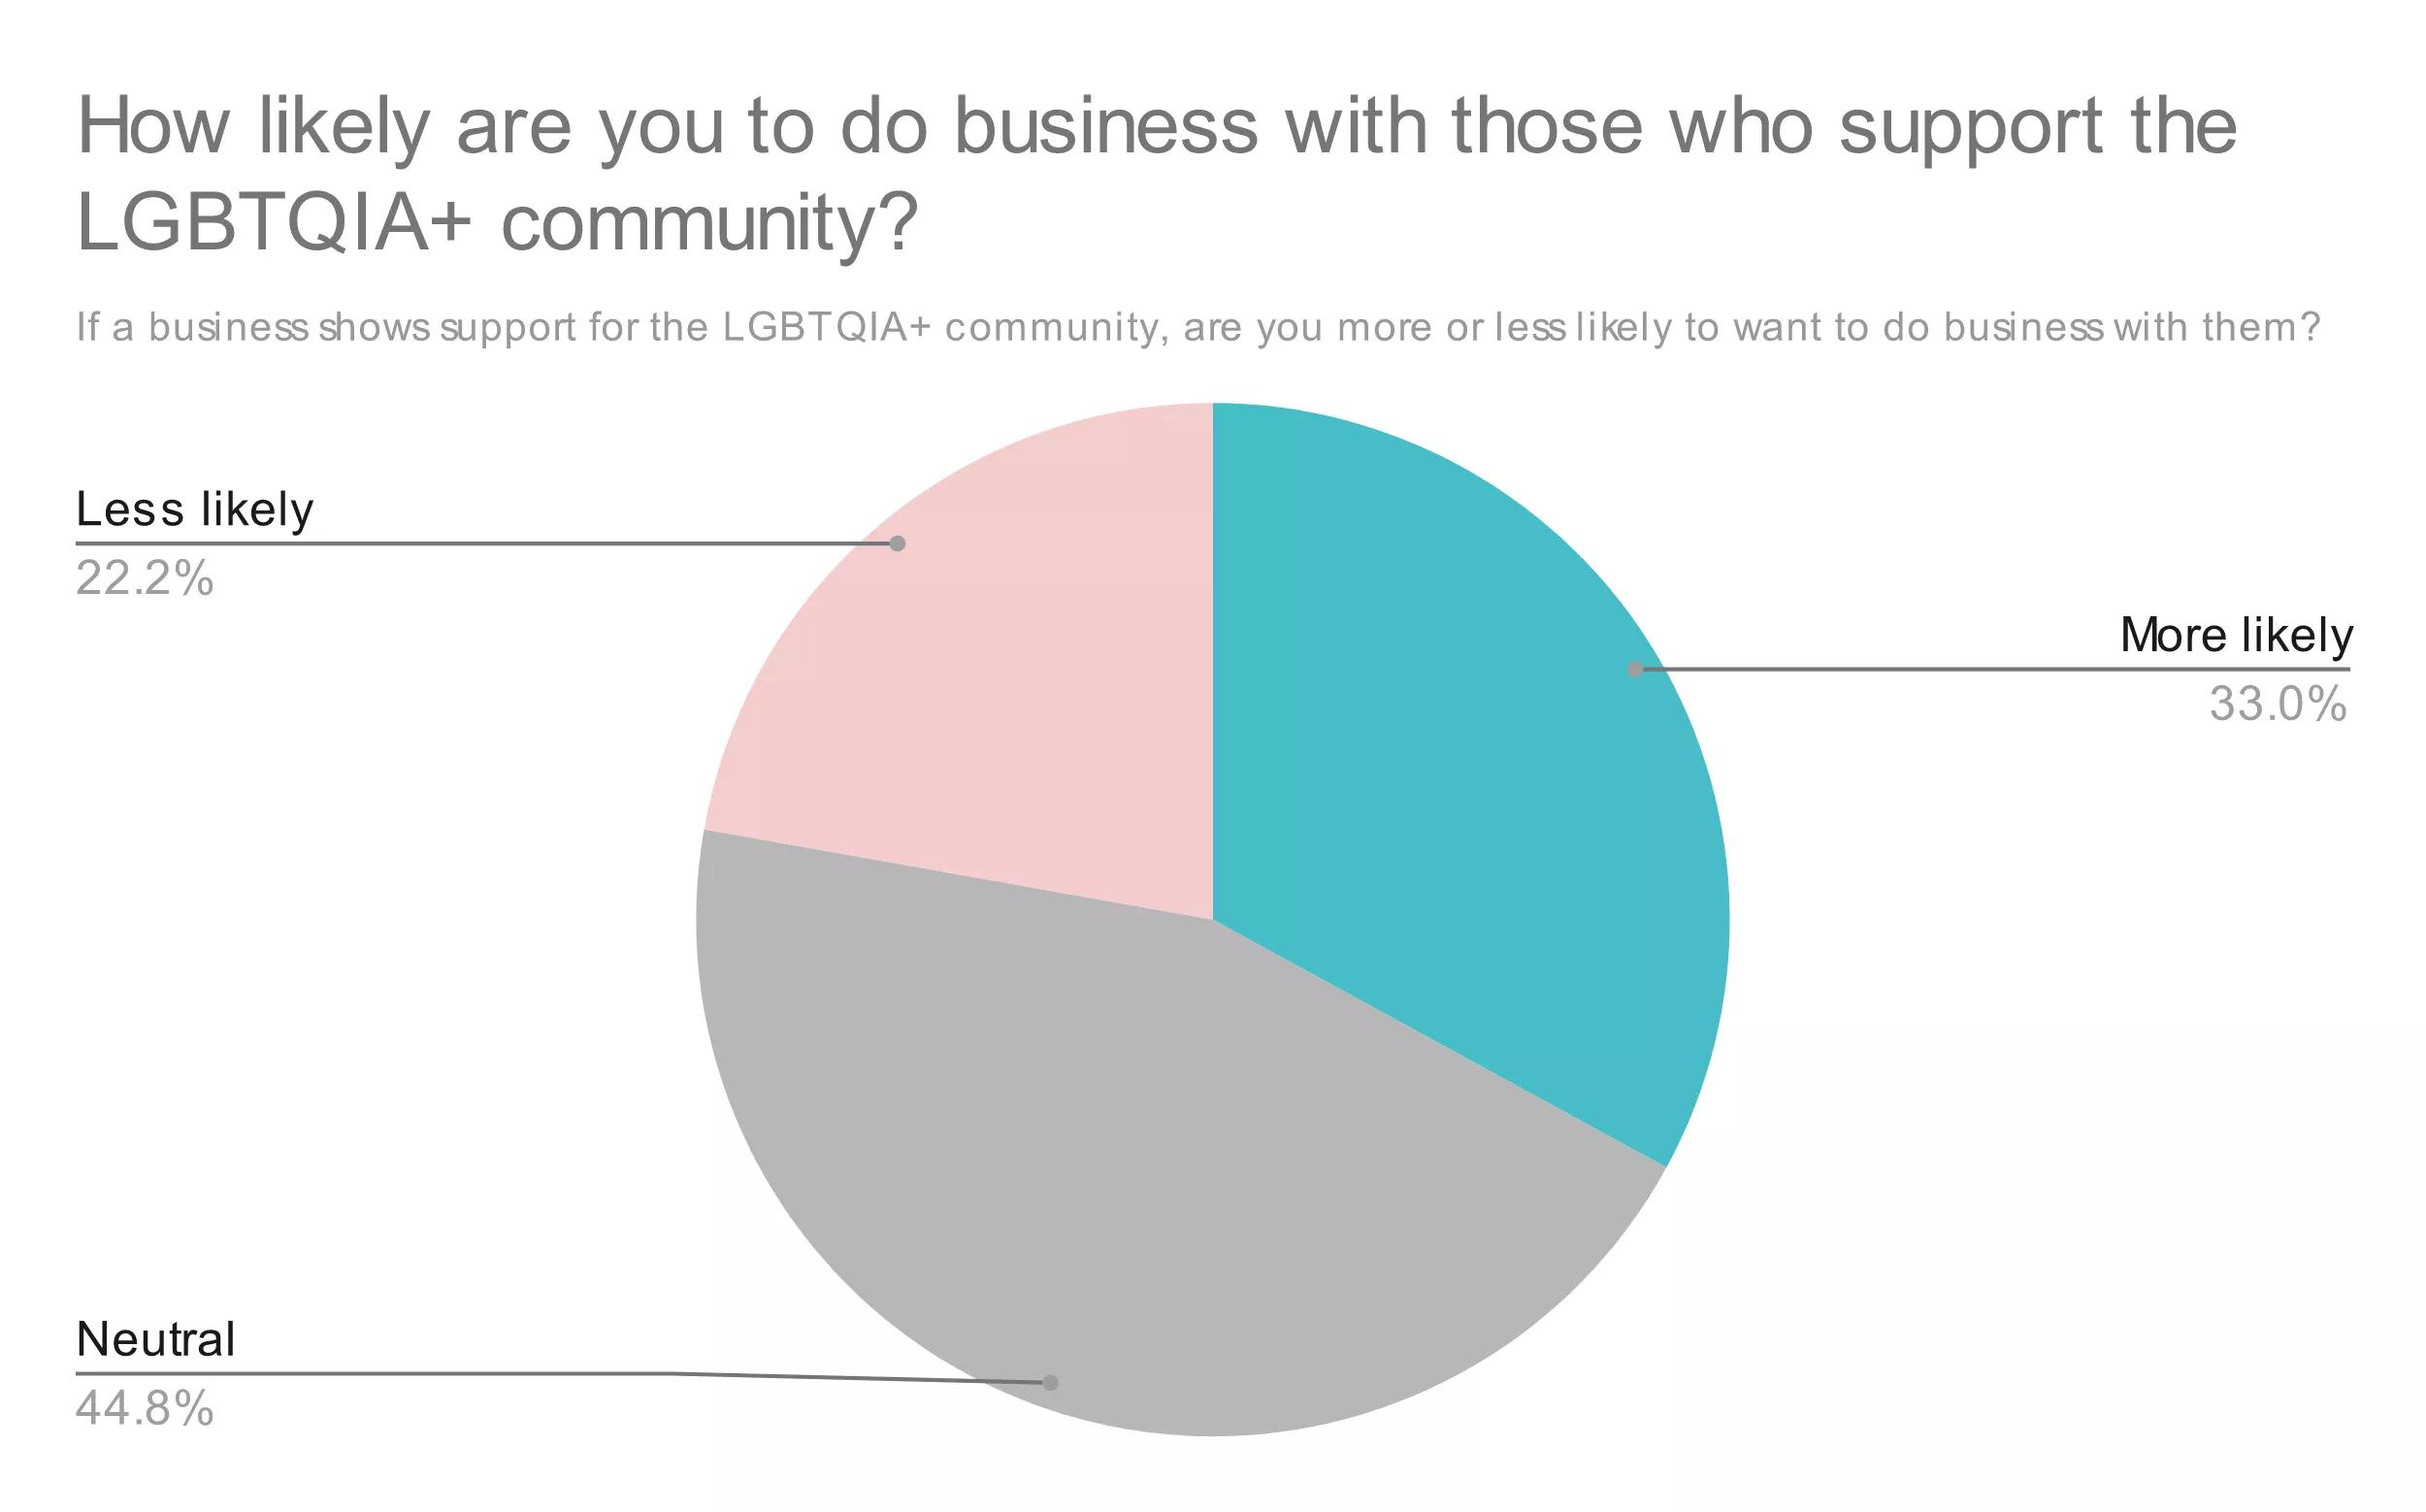 pie chart showing percentage of people who are less likely, more likely, and neutral for doing business with a company that supports LGBTQIA+